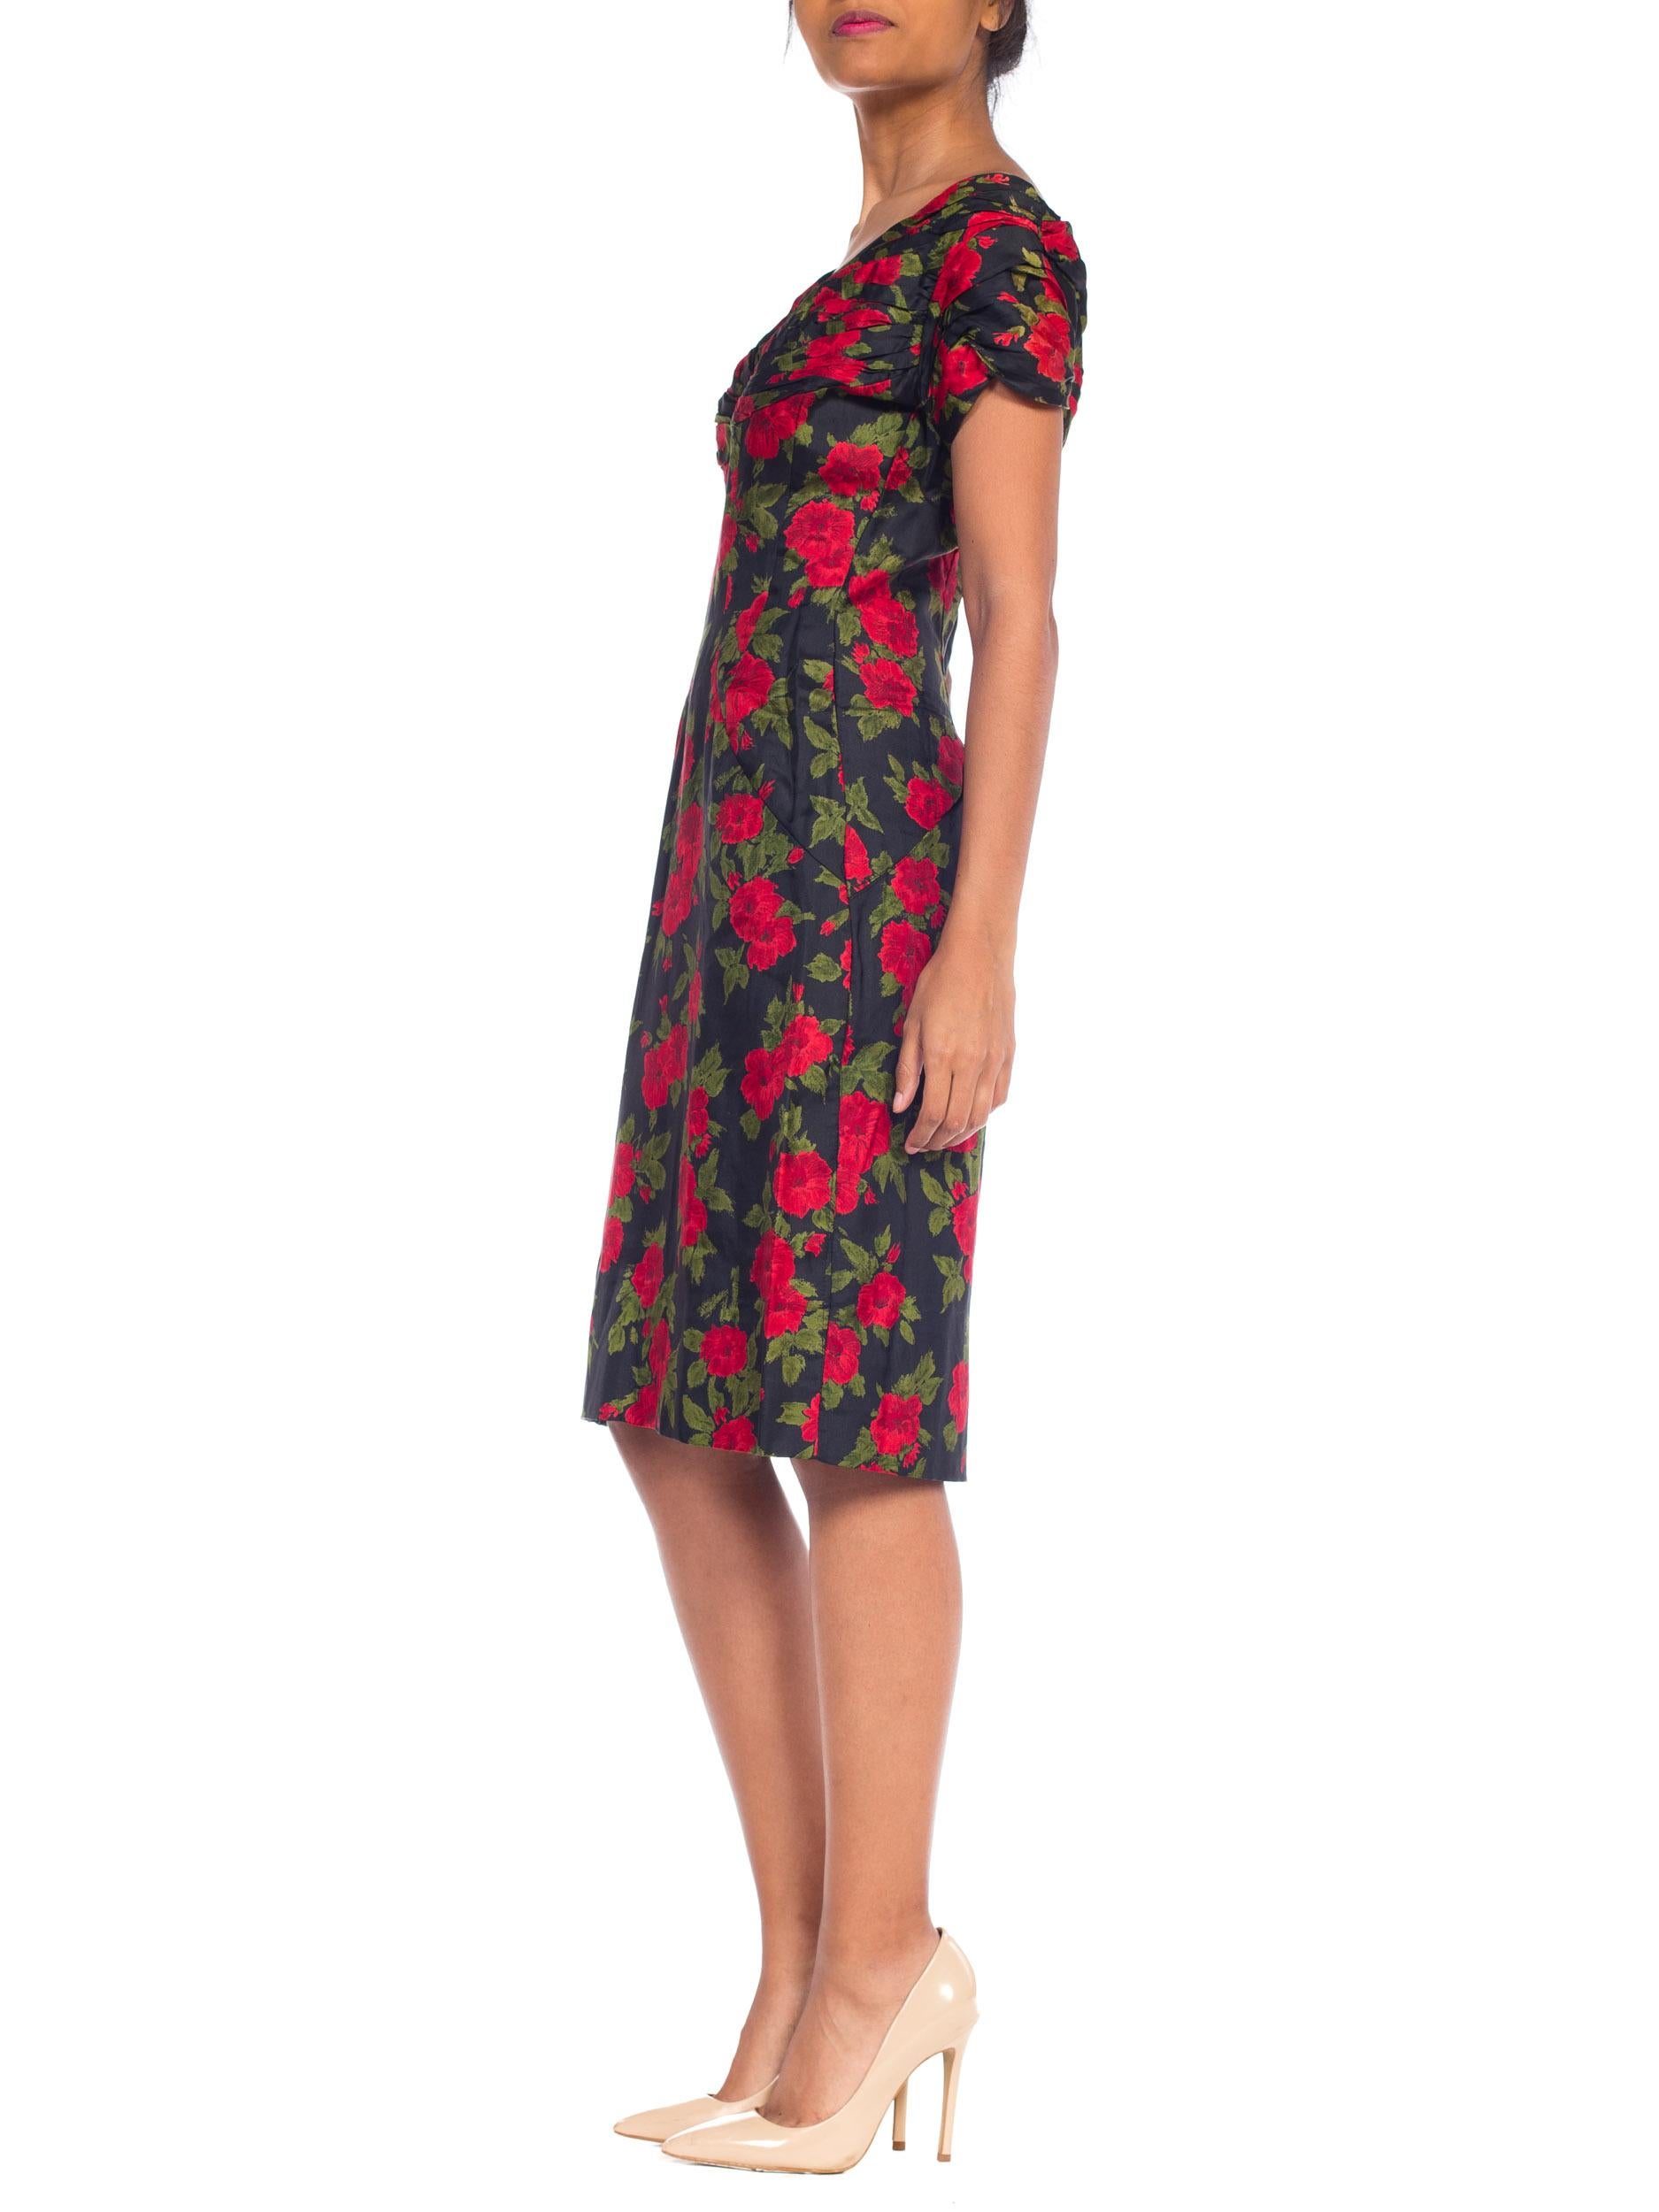 1950S DOLCE & GABBANA Style Silk Twill Red Black Classic Rose Floral Printed Dr For Sale 5